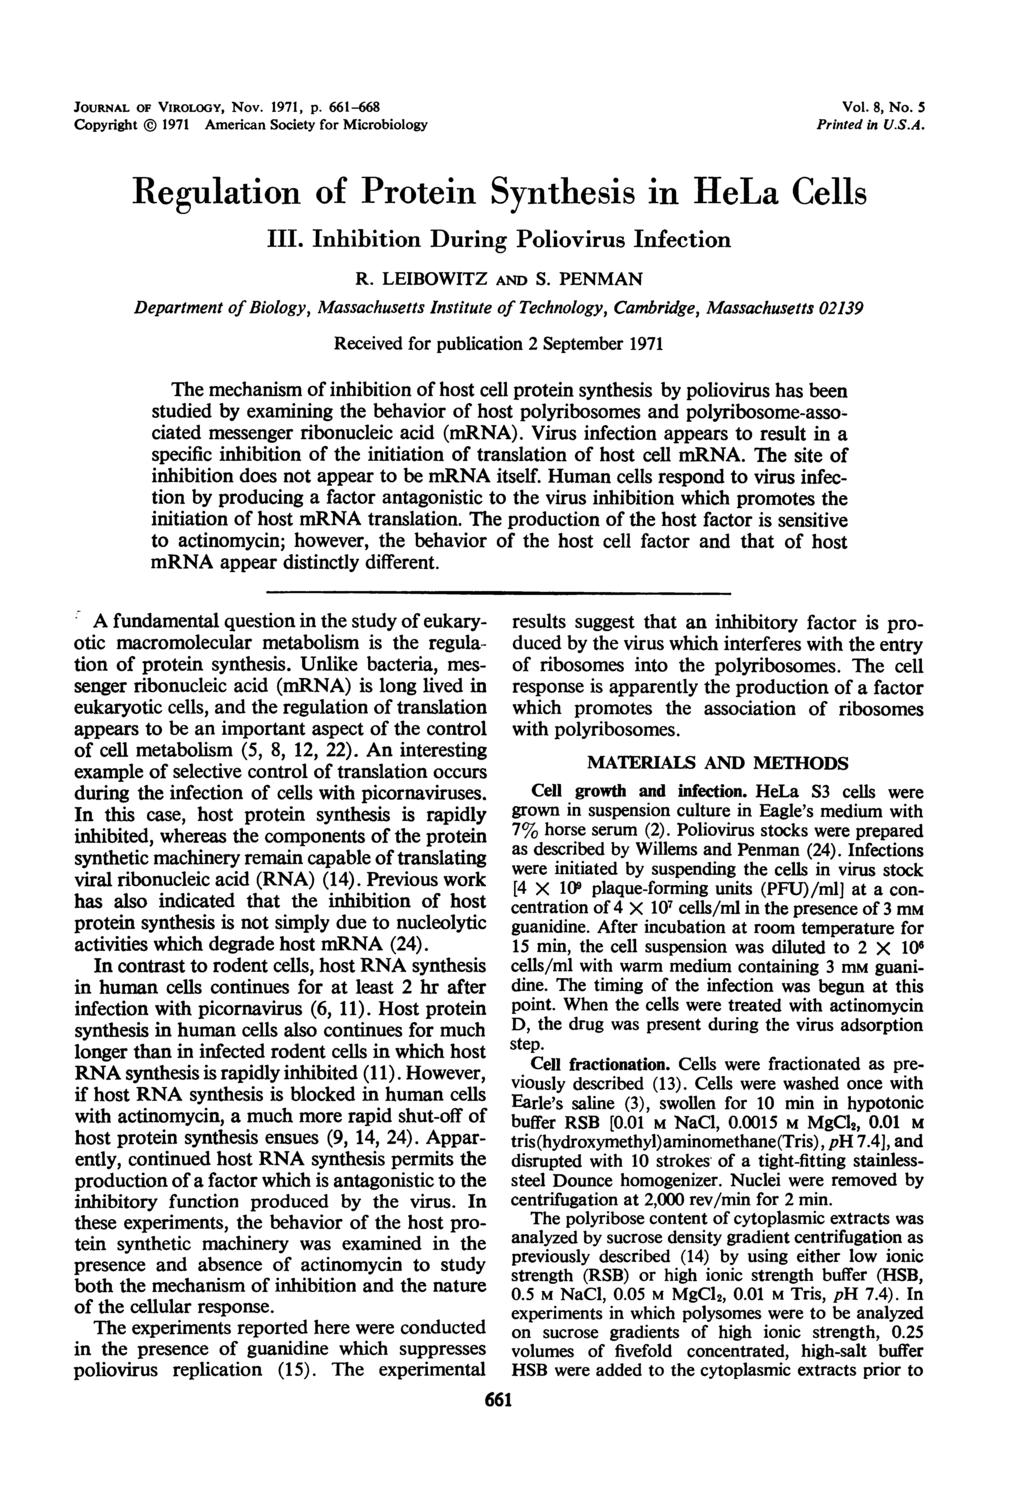 JOURNAL OF VIROLOGY, Nov. 1971, p. 661-668 Copyright 1971 American Society for Microbiology Vol. 8, No. 5 Printed in U.S.A. Regulation of Protein Synthesis in HeLa Cells III.